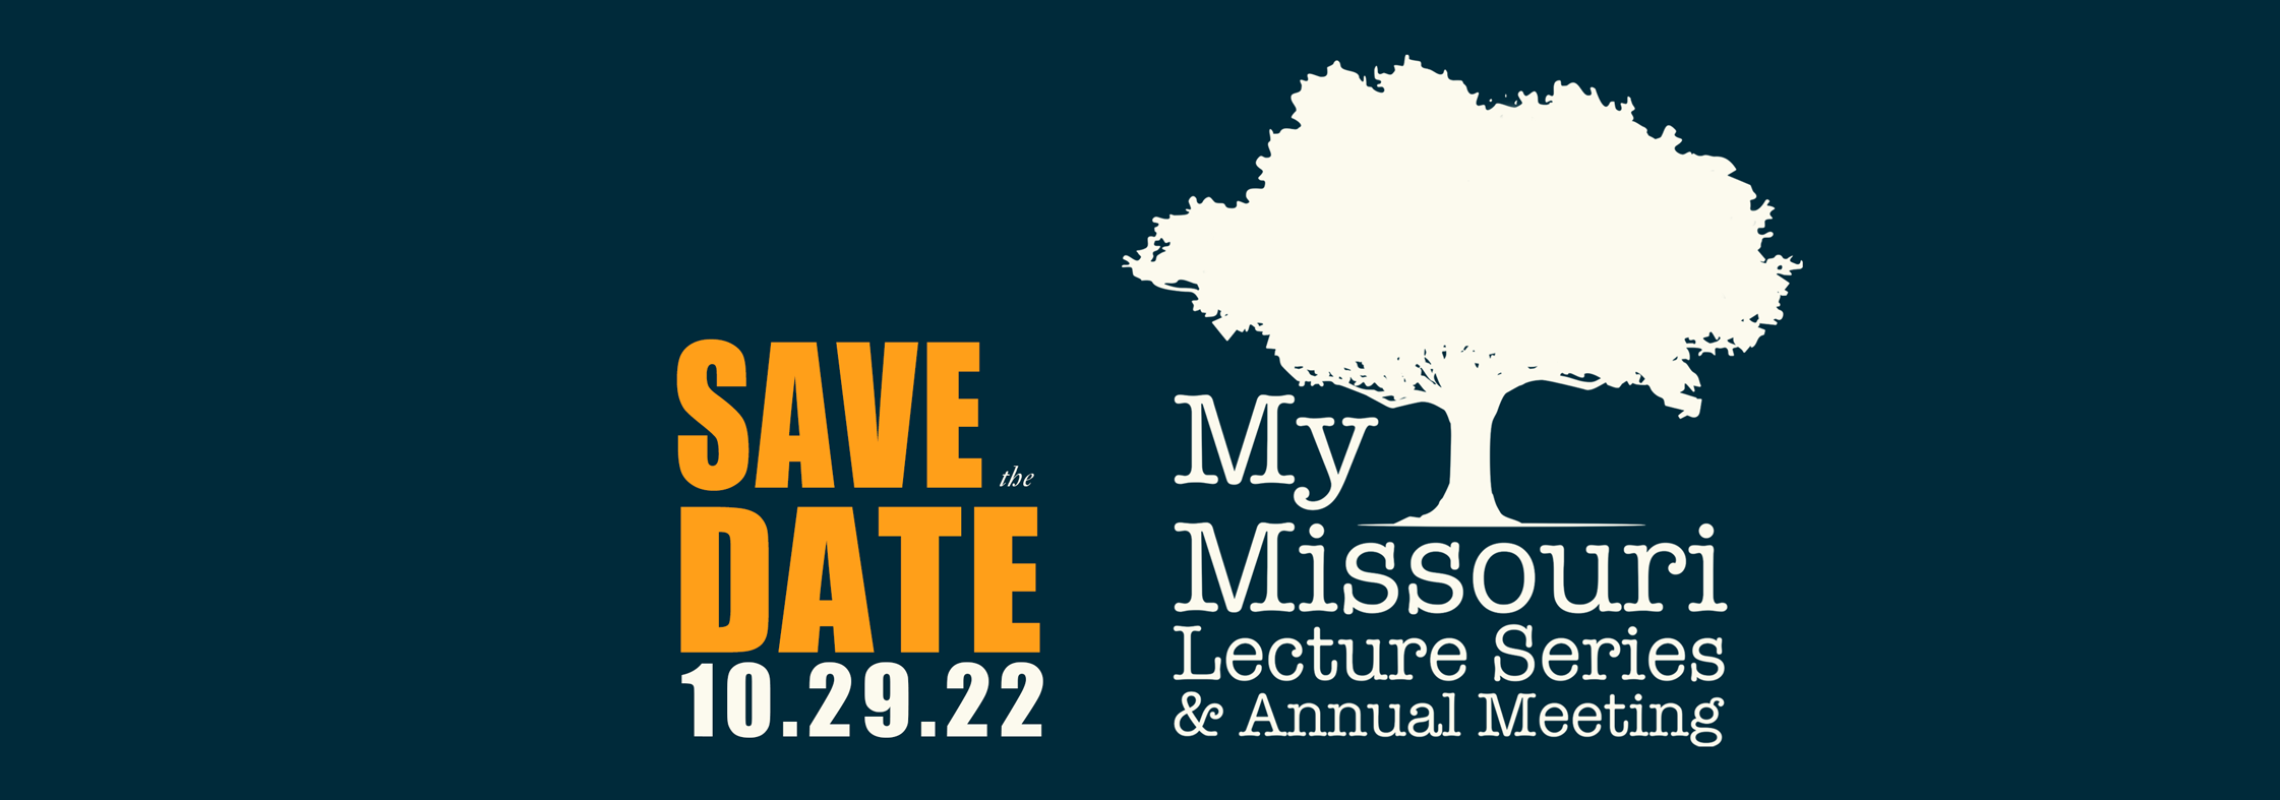 Save the Date Oct 29, 2022 for the My Missouri Lecture and Annual Meeting